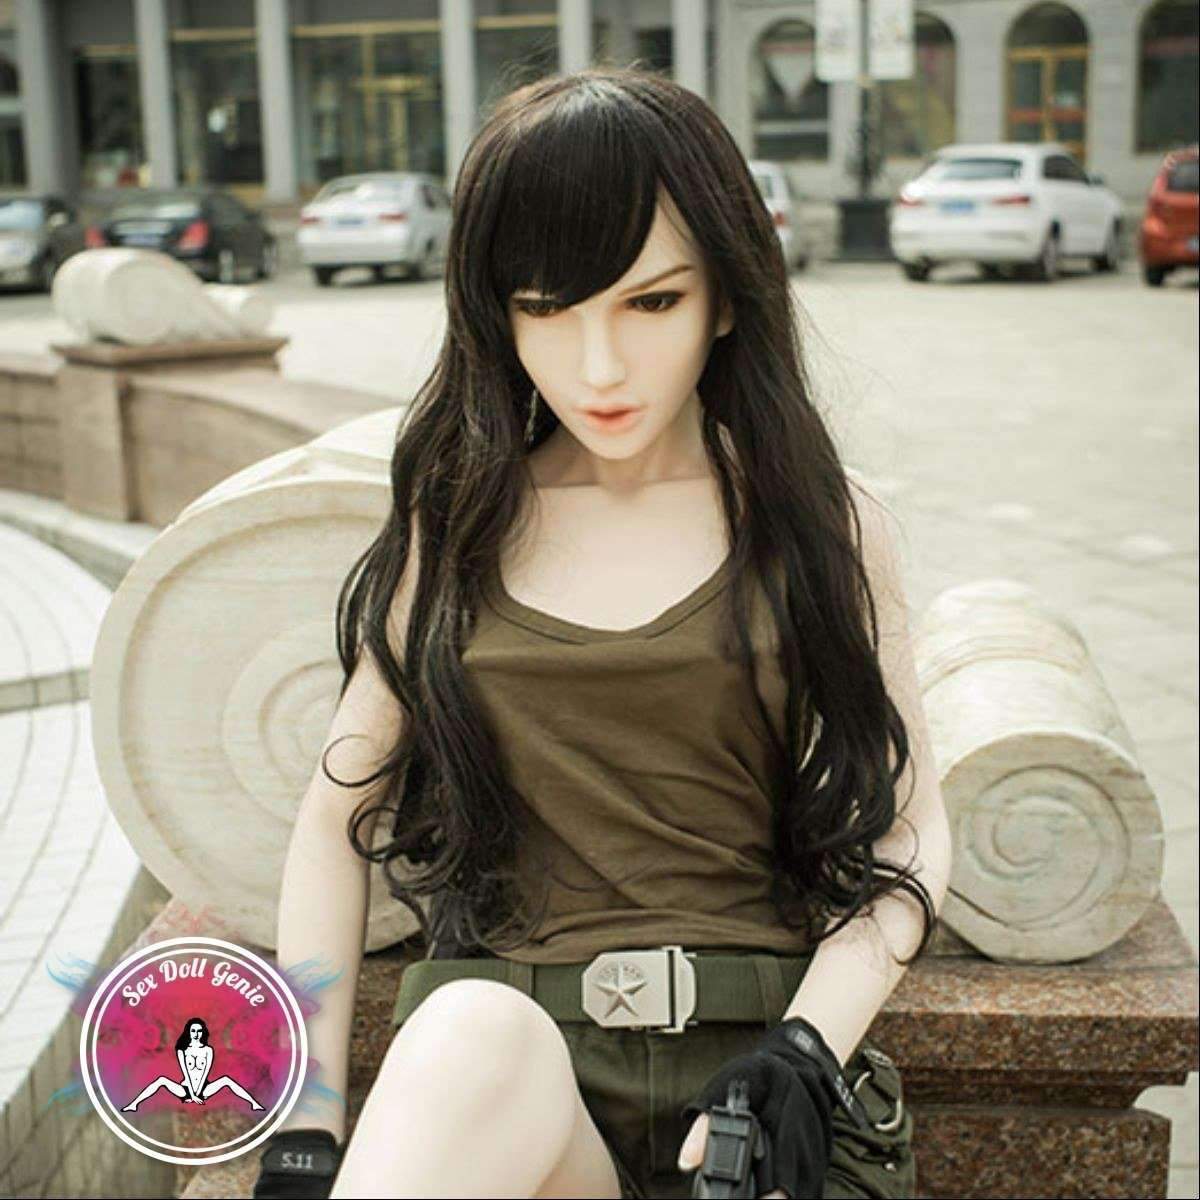 DS Doll - 163Plus - Sandy Head - Type 1 D Cup Silicone Doll-7